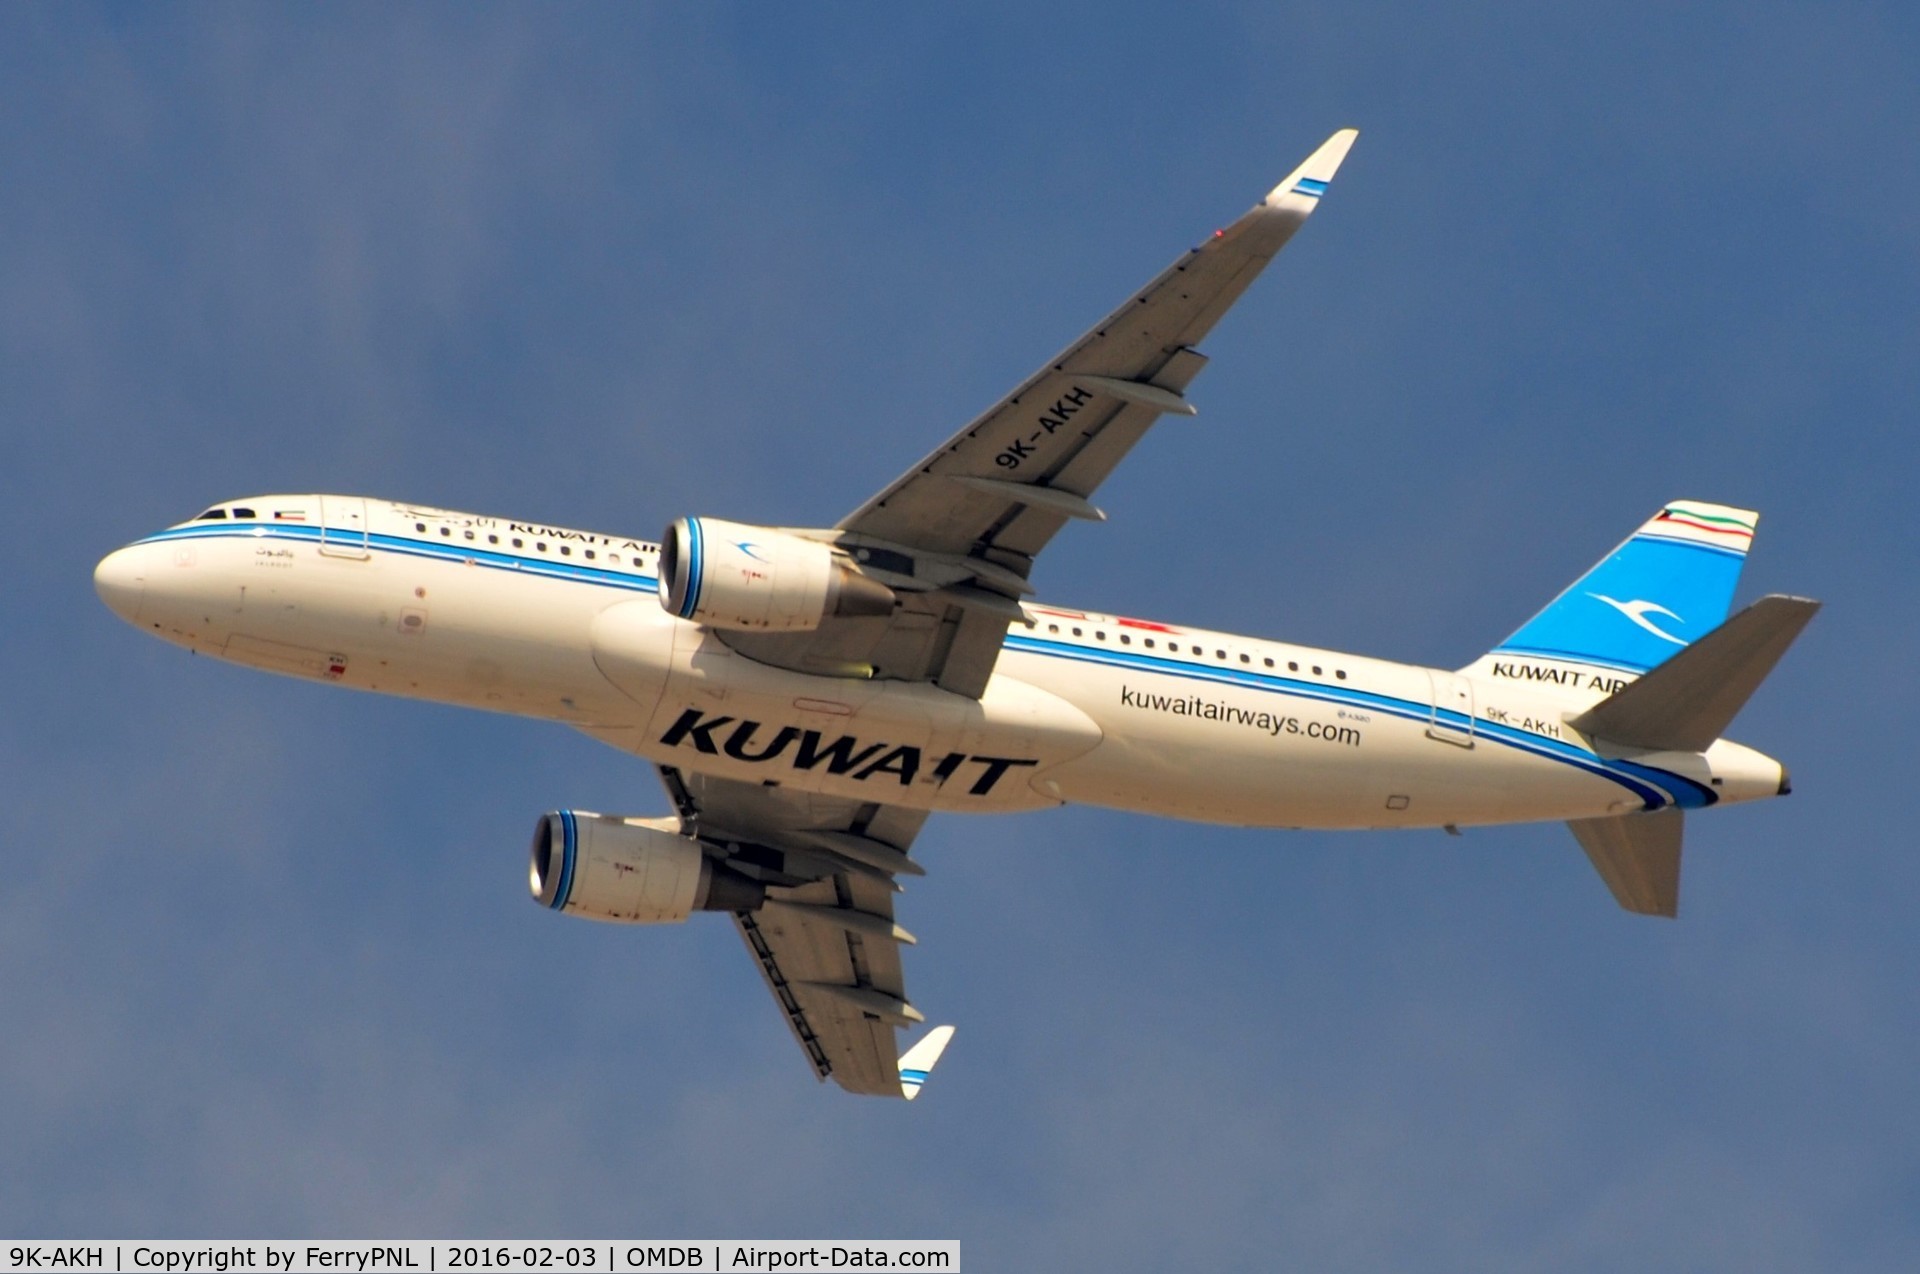 9K-AKH, 2015 Airbus A320-214 C/N 6476, Kuwait A320 departing for KWI.